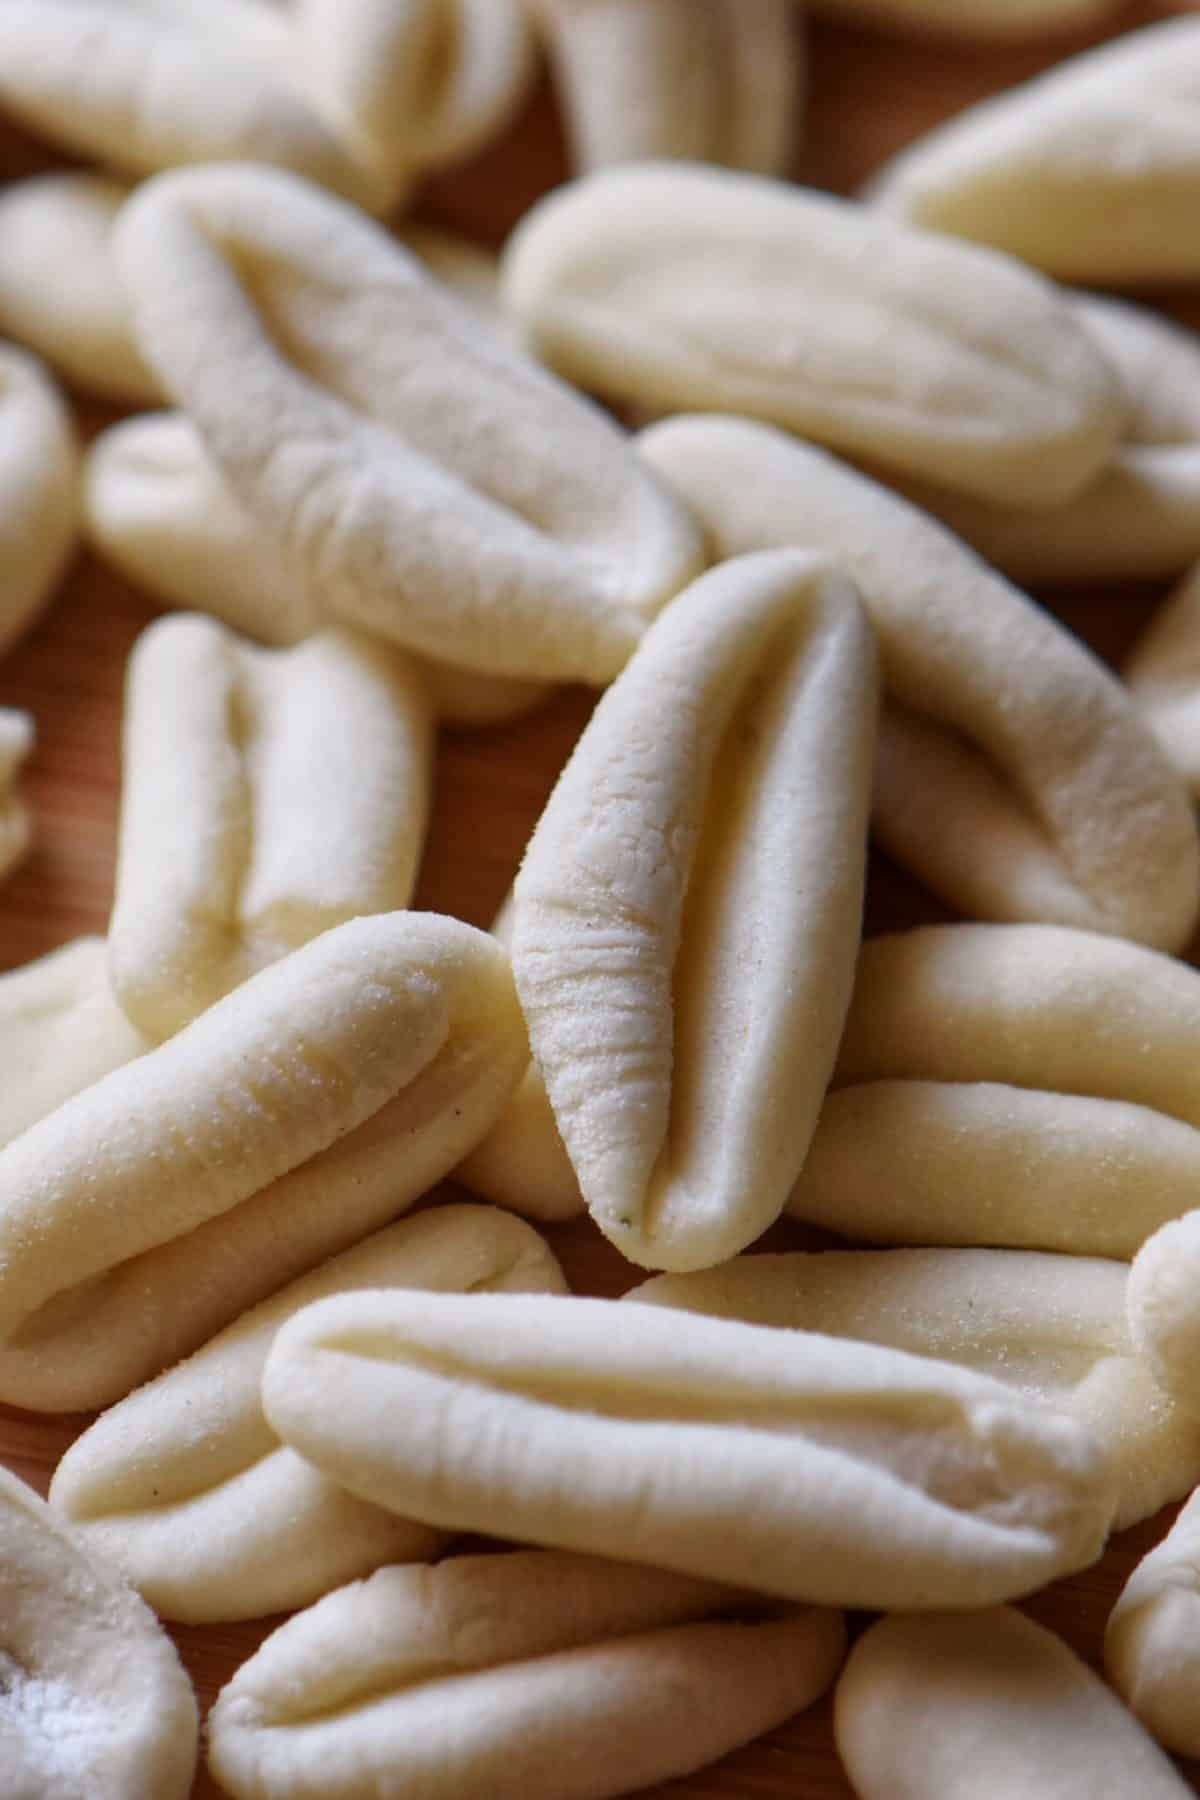 Freshly made ricotta cavatelli in a small pile.